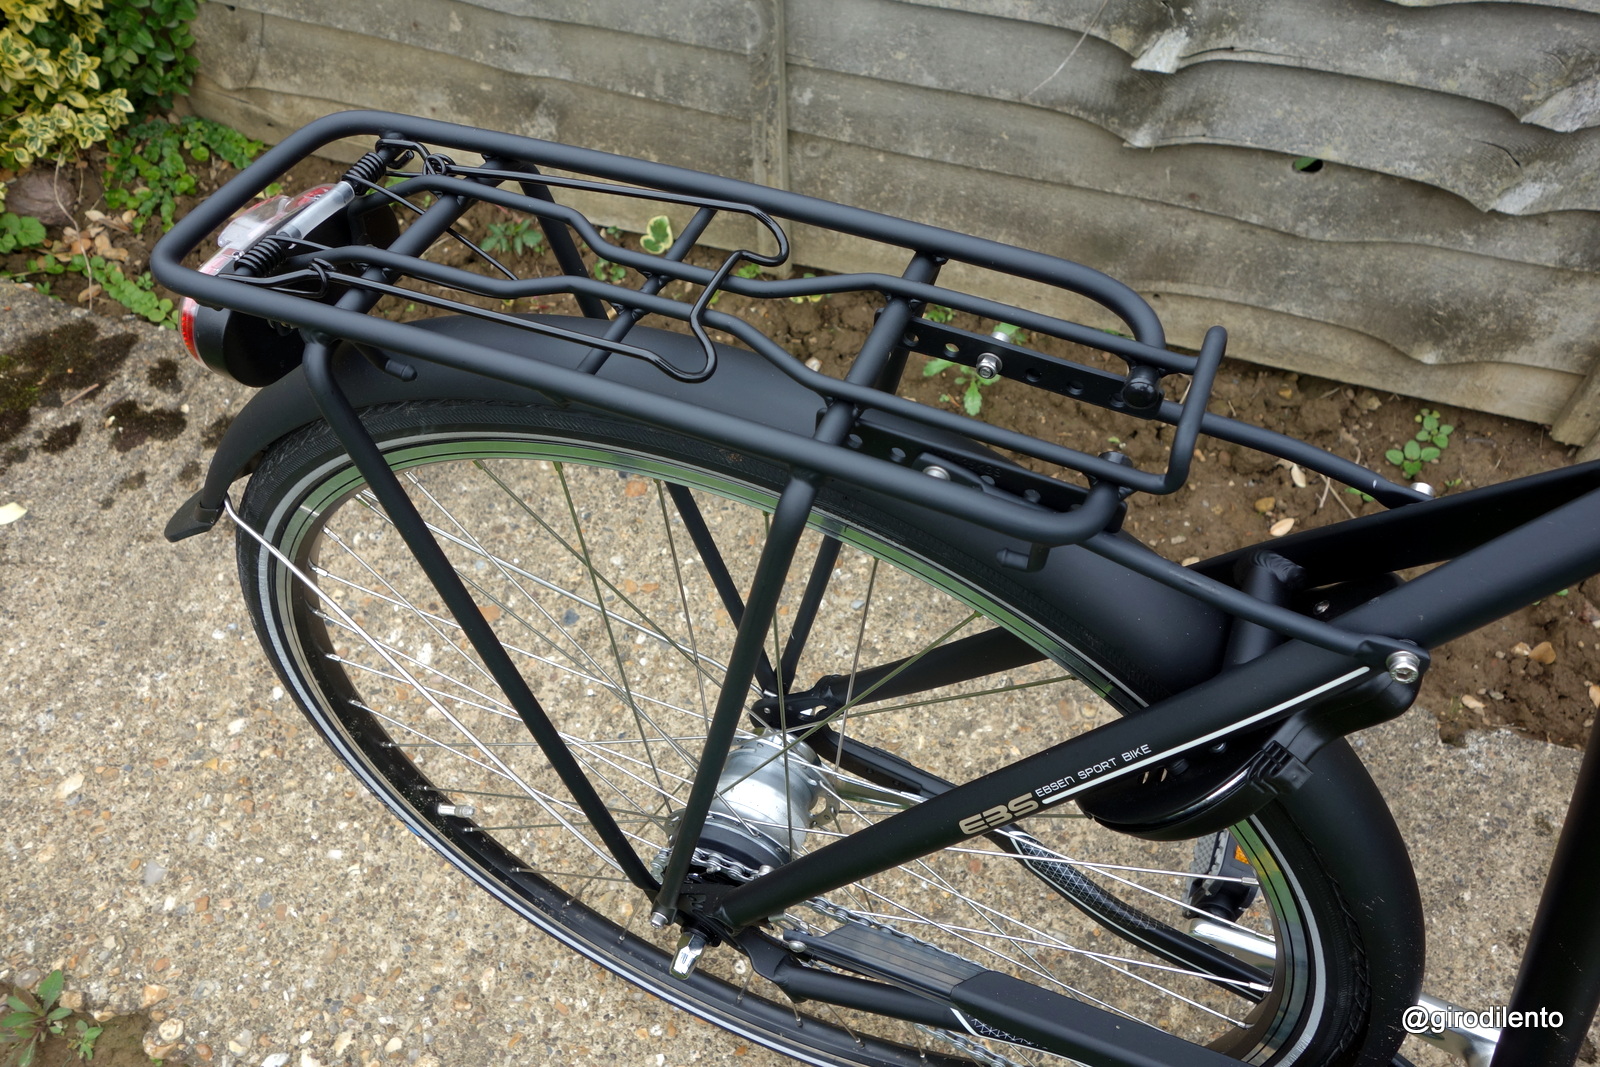 Sturdy rear rack (easily strong enough for 20kg+ loads) and a view of the Nexus hub